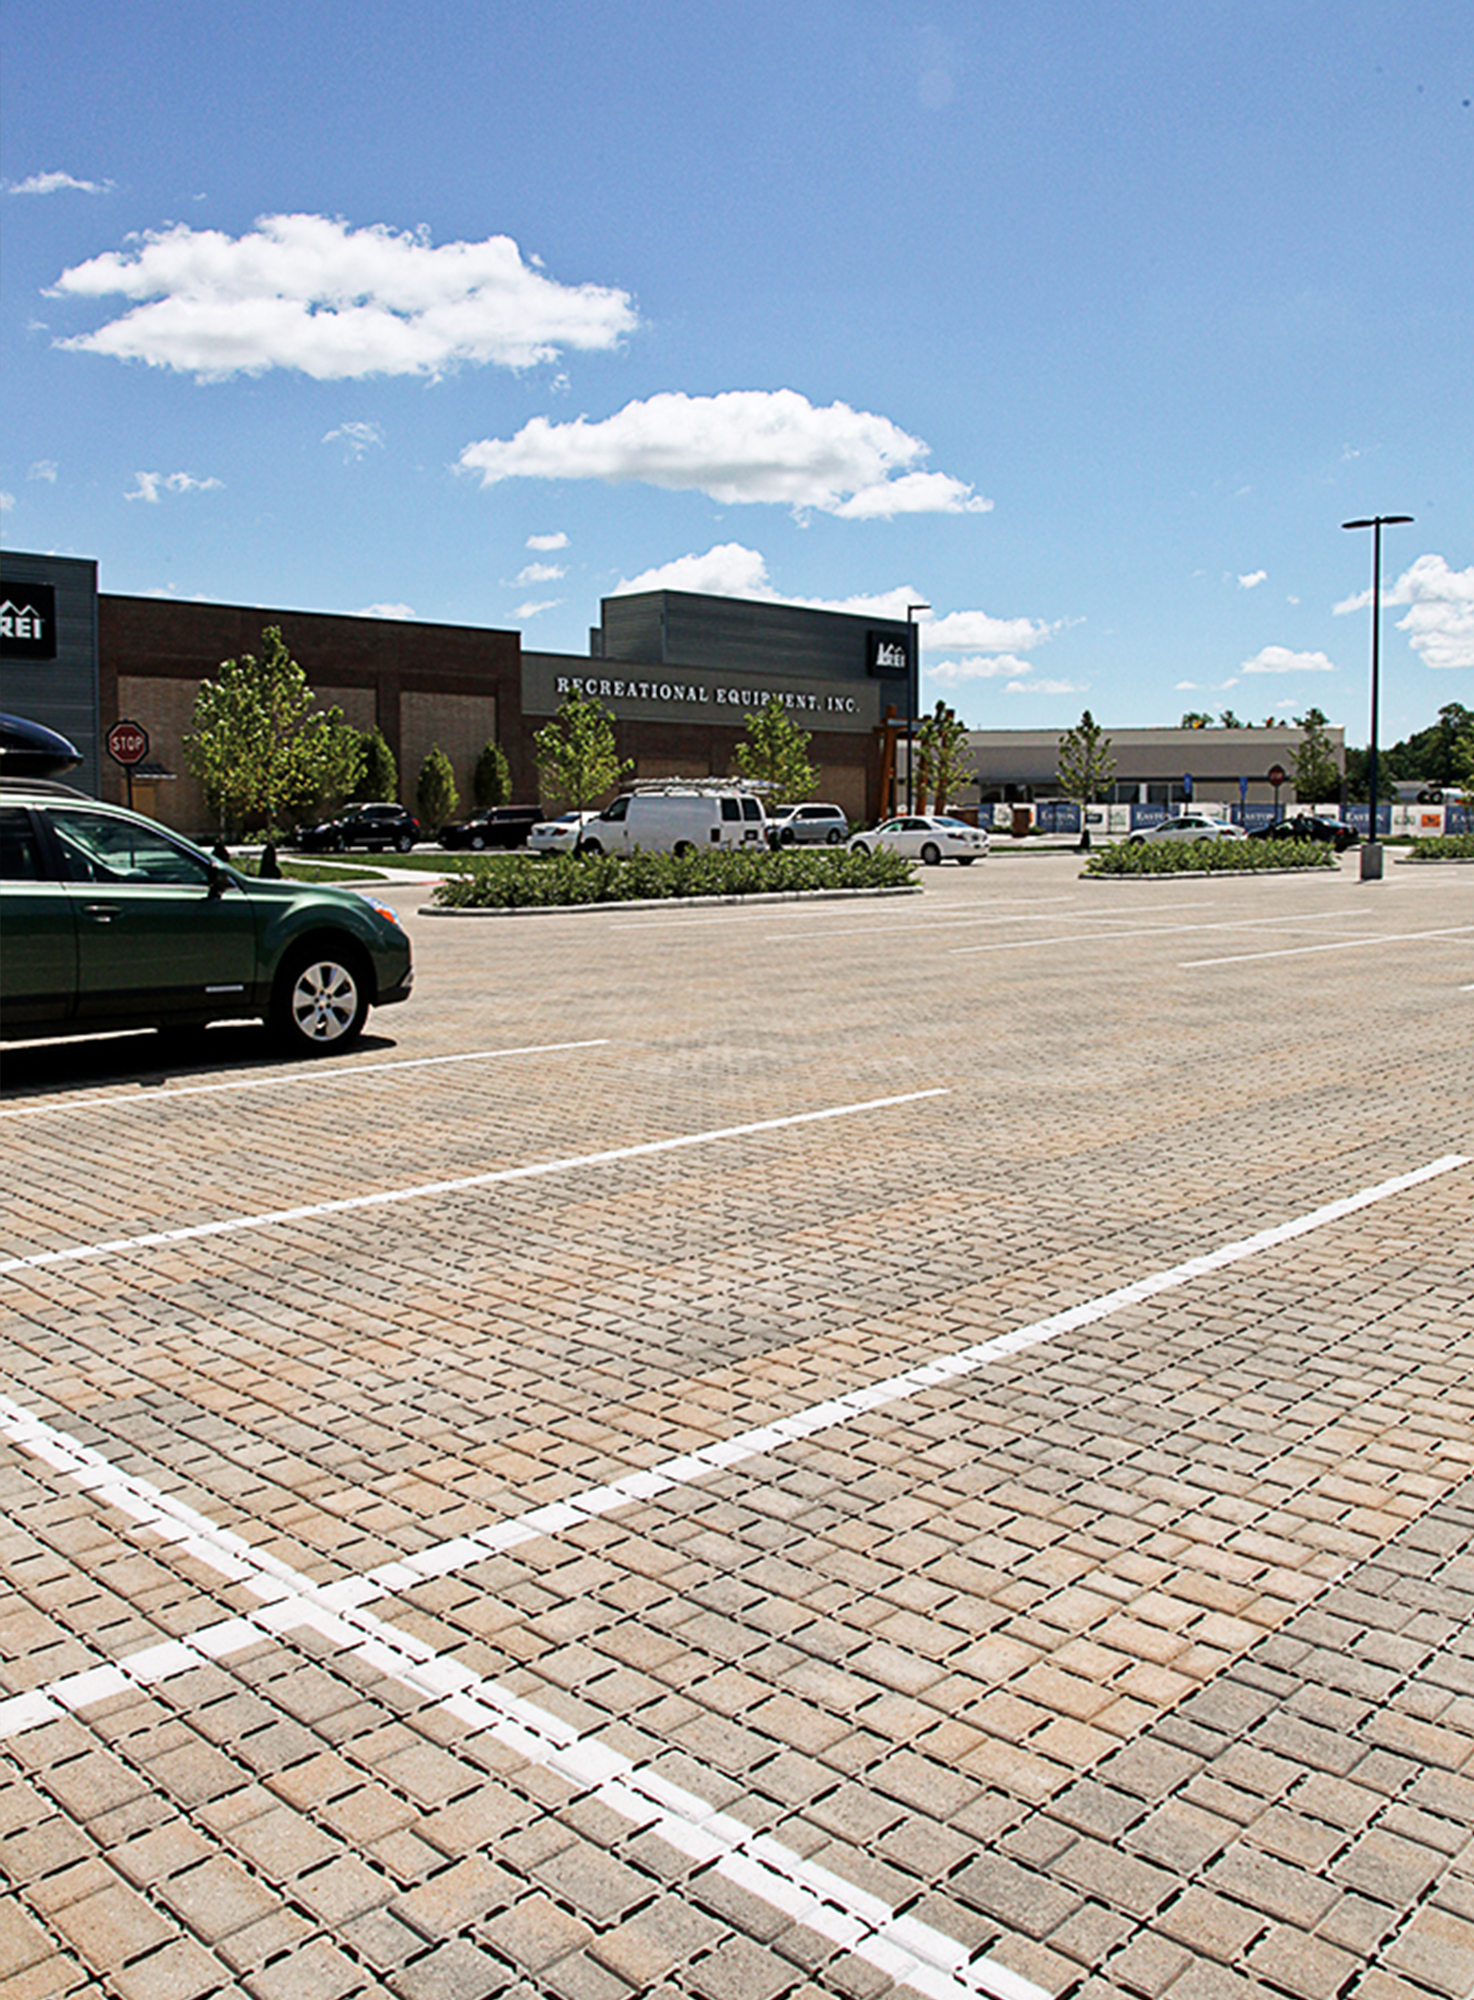 Painted white lines over Eco-Optiloc pavers delineate parking spaces at the Easton Gateway plaza between landscaping and garden beds.